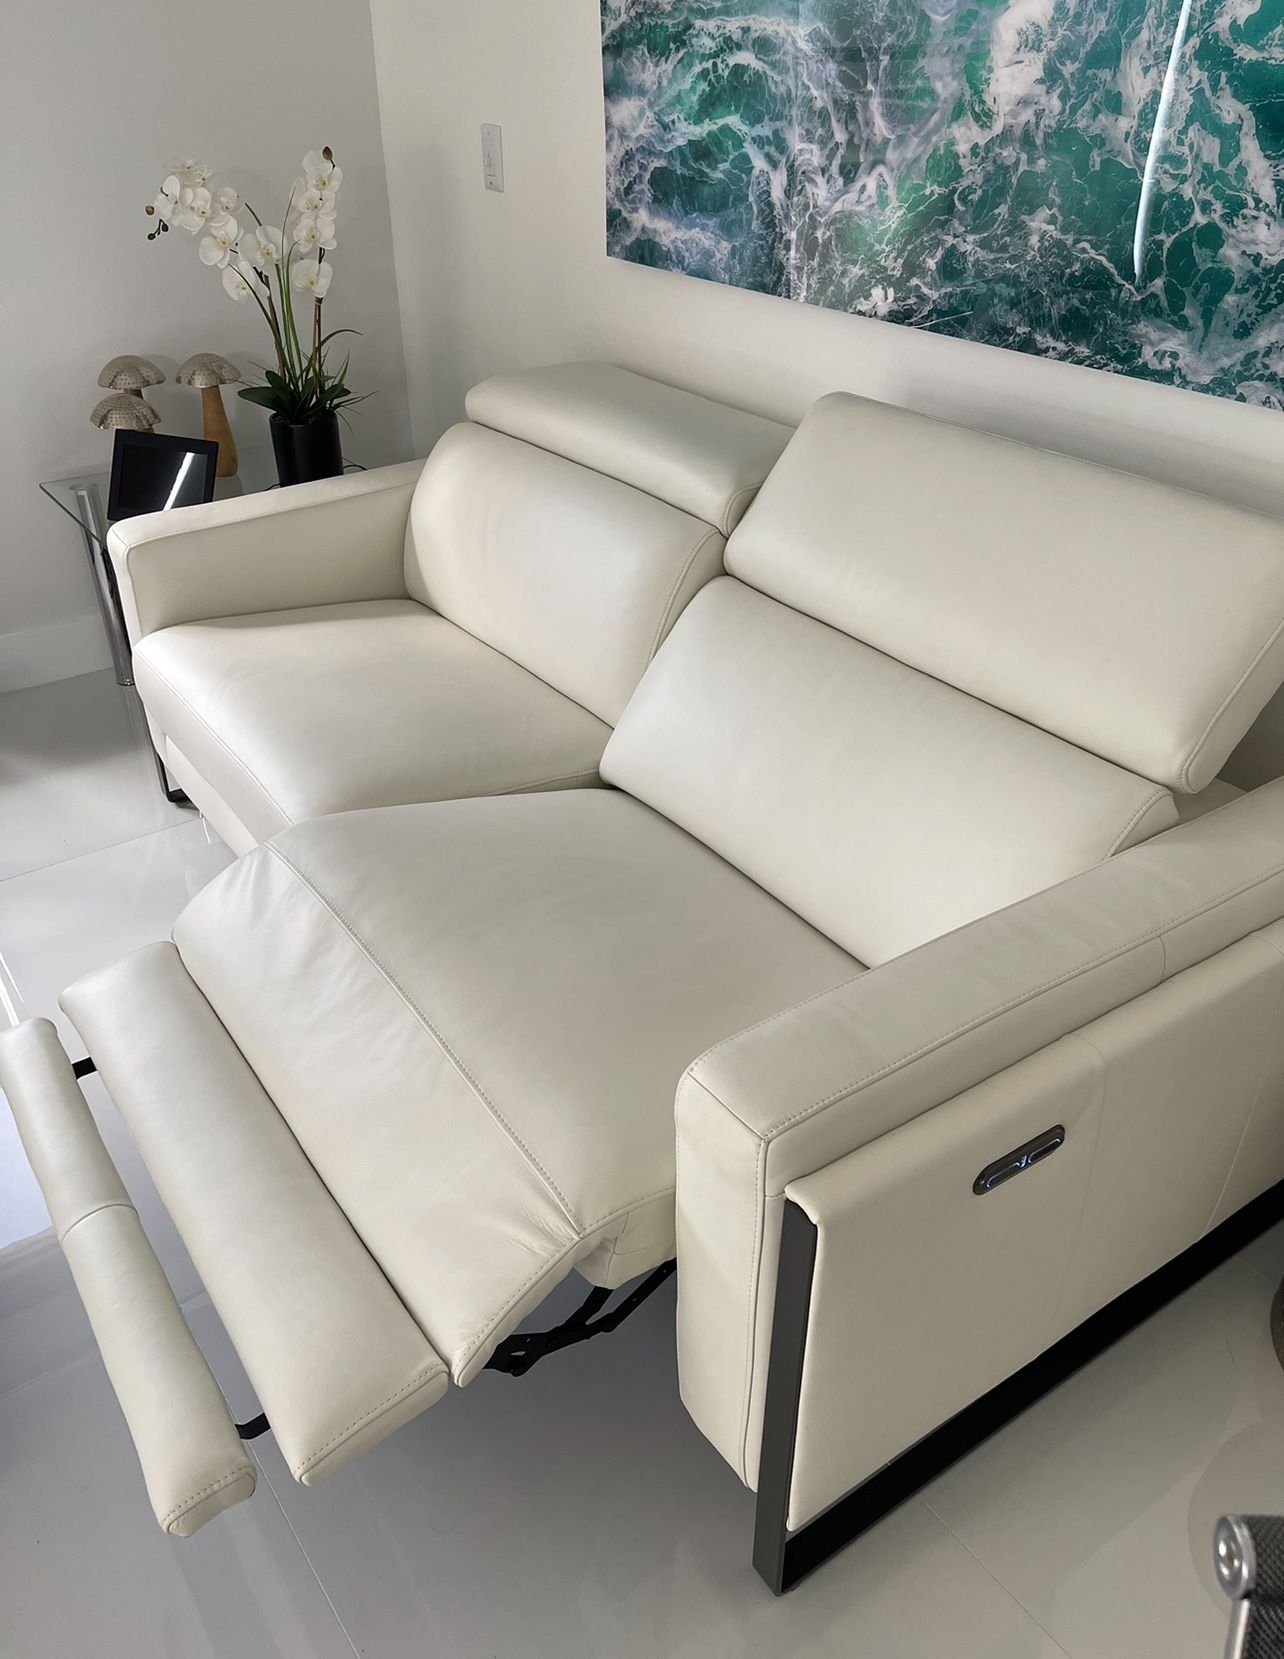 New!!! Power Reclining Loveseat Real Leather, adjustable headrest and footrest. Dimensions 63 W x 33 H x 43.5 L